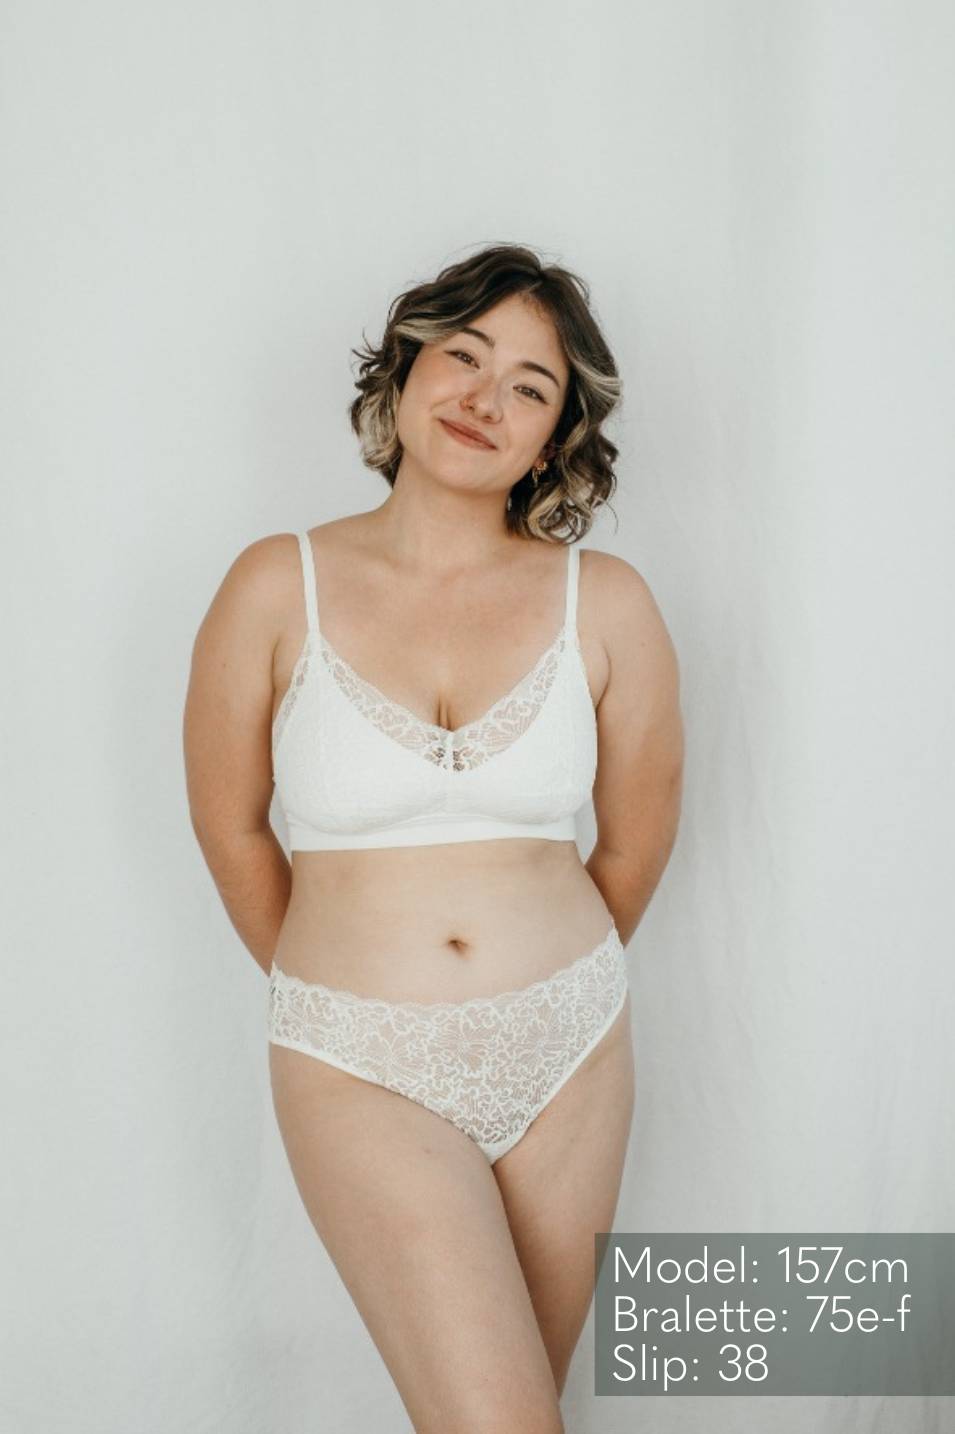 Model wears Bralette Lana and the matching String in ivory and smiles. 